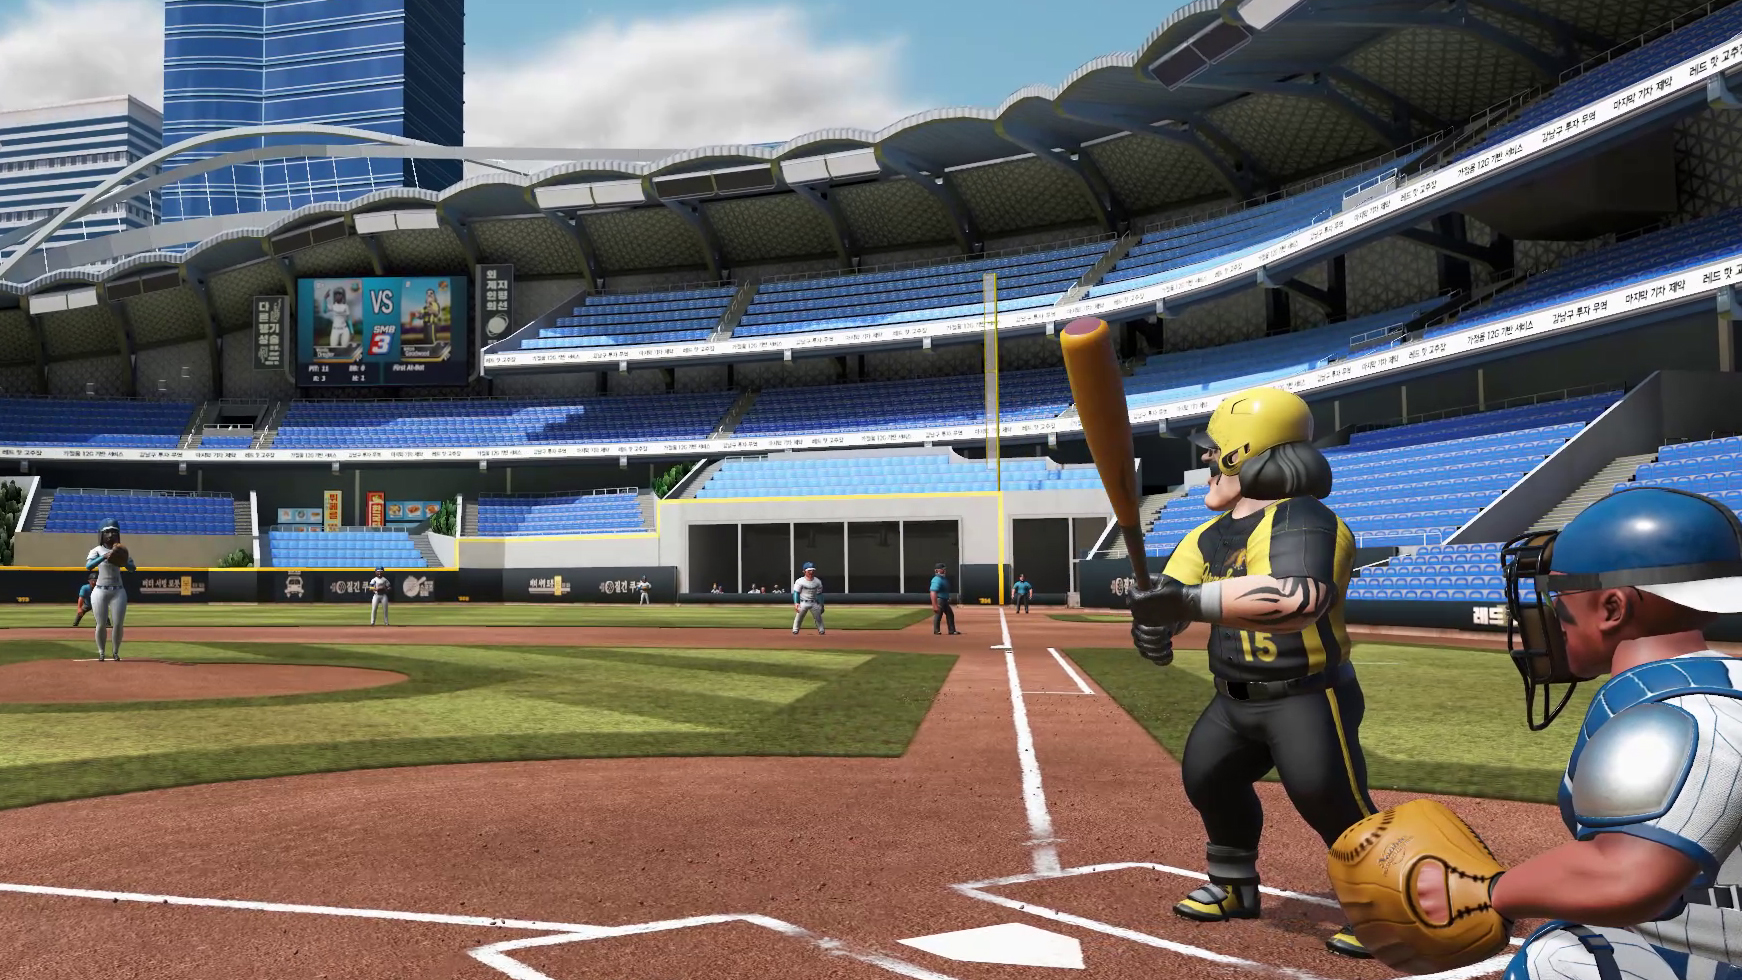 Playing Super Mega Baseball 3 With No Crowds In The Stands Is Incredibly Eerie Pc Gamer